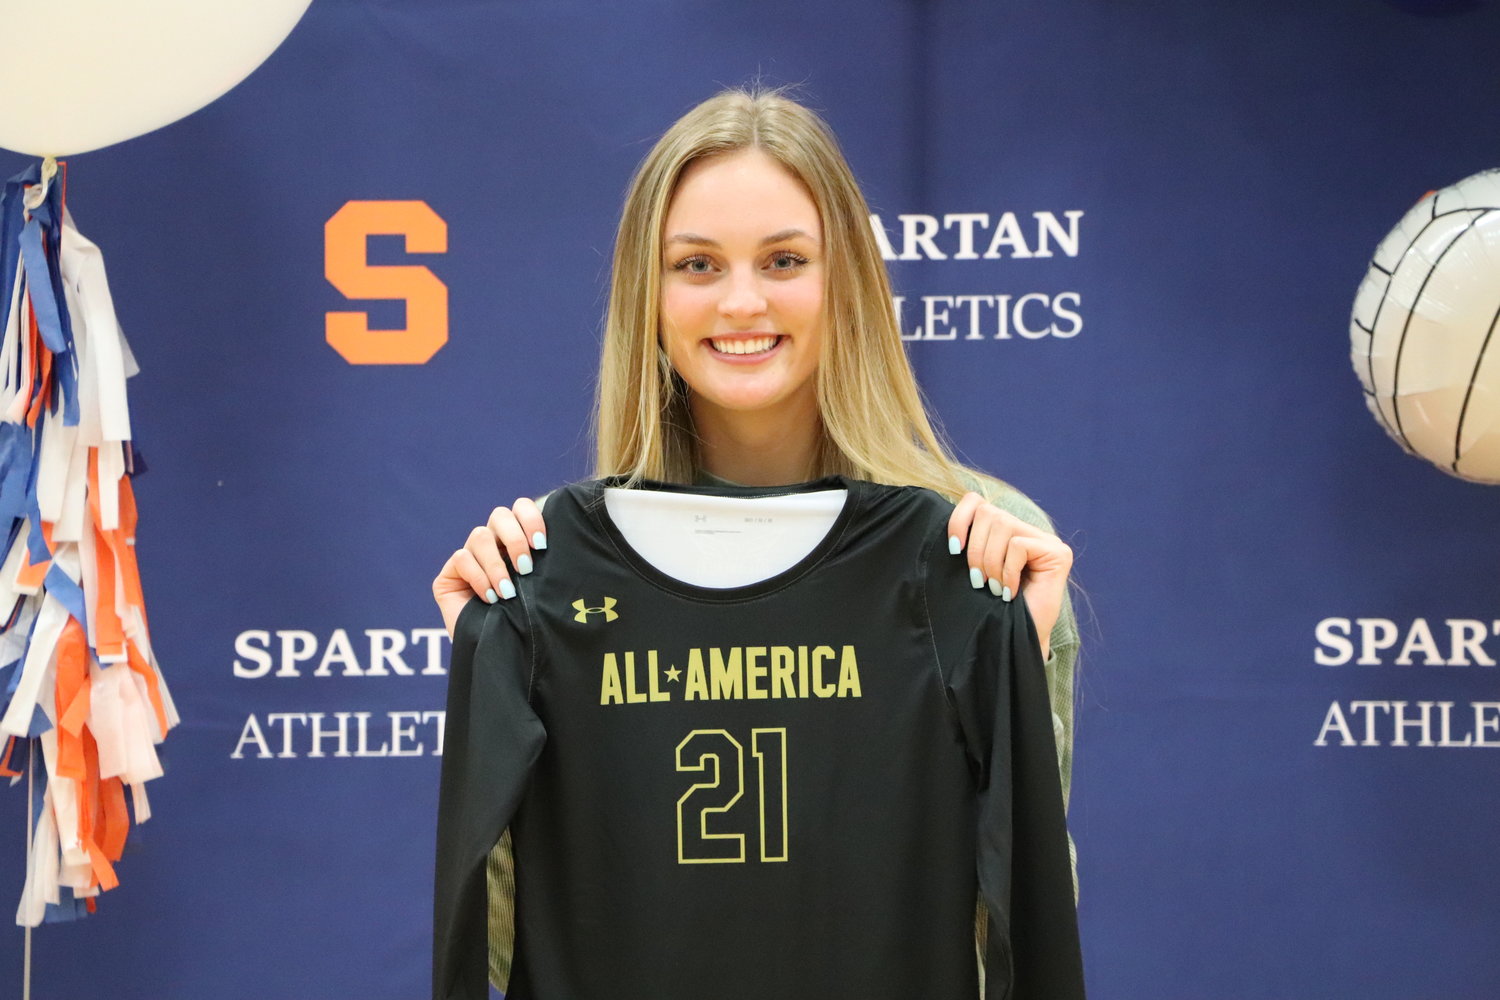 Seven Lakes senior outside hitter Ally Batenhorst was awarded with her Under Armour All-American jersey on Wednesday morning after being selected as one of 11 players to the first team.